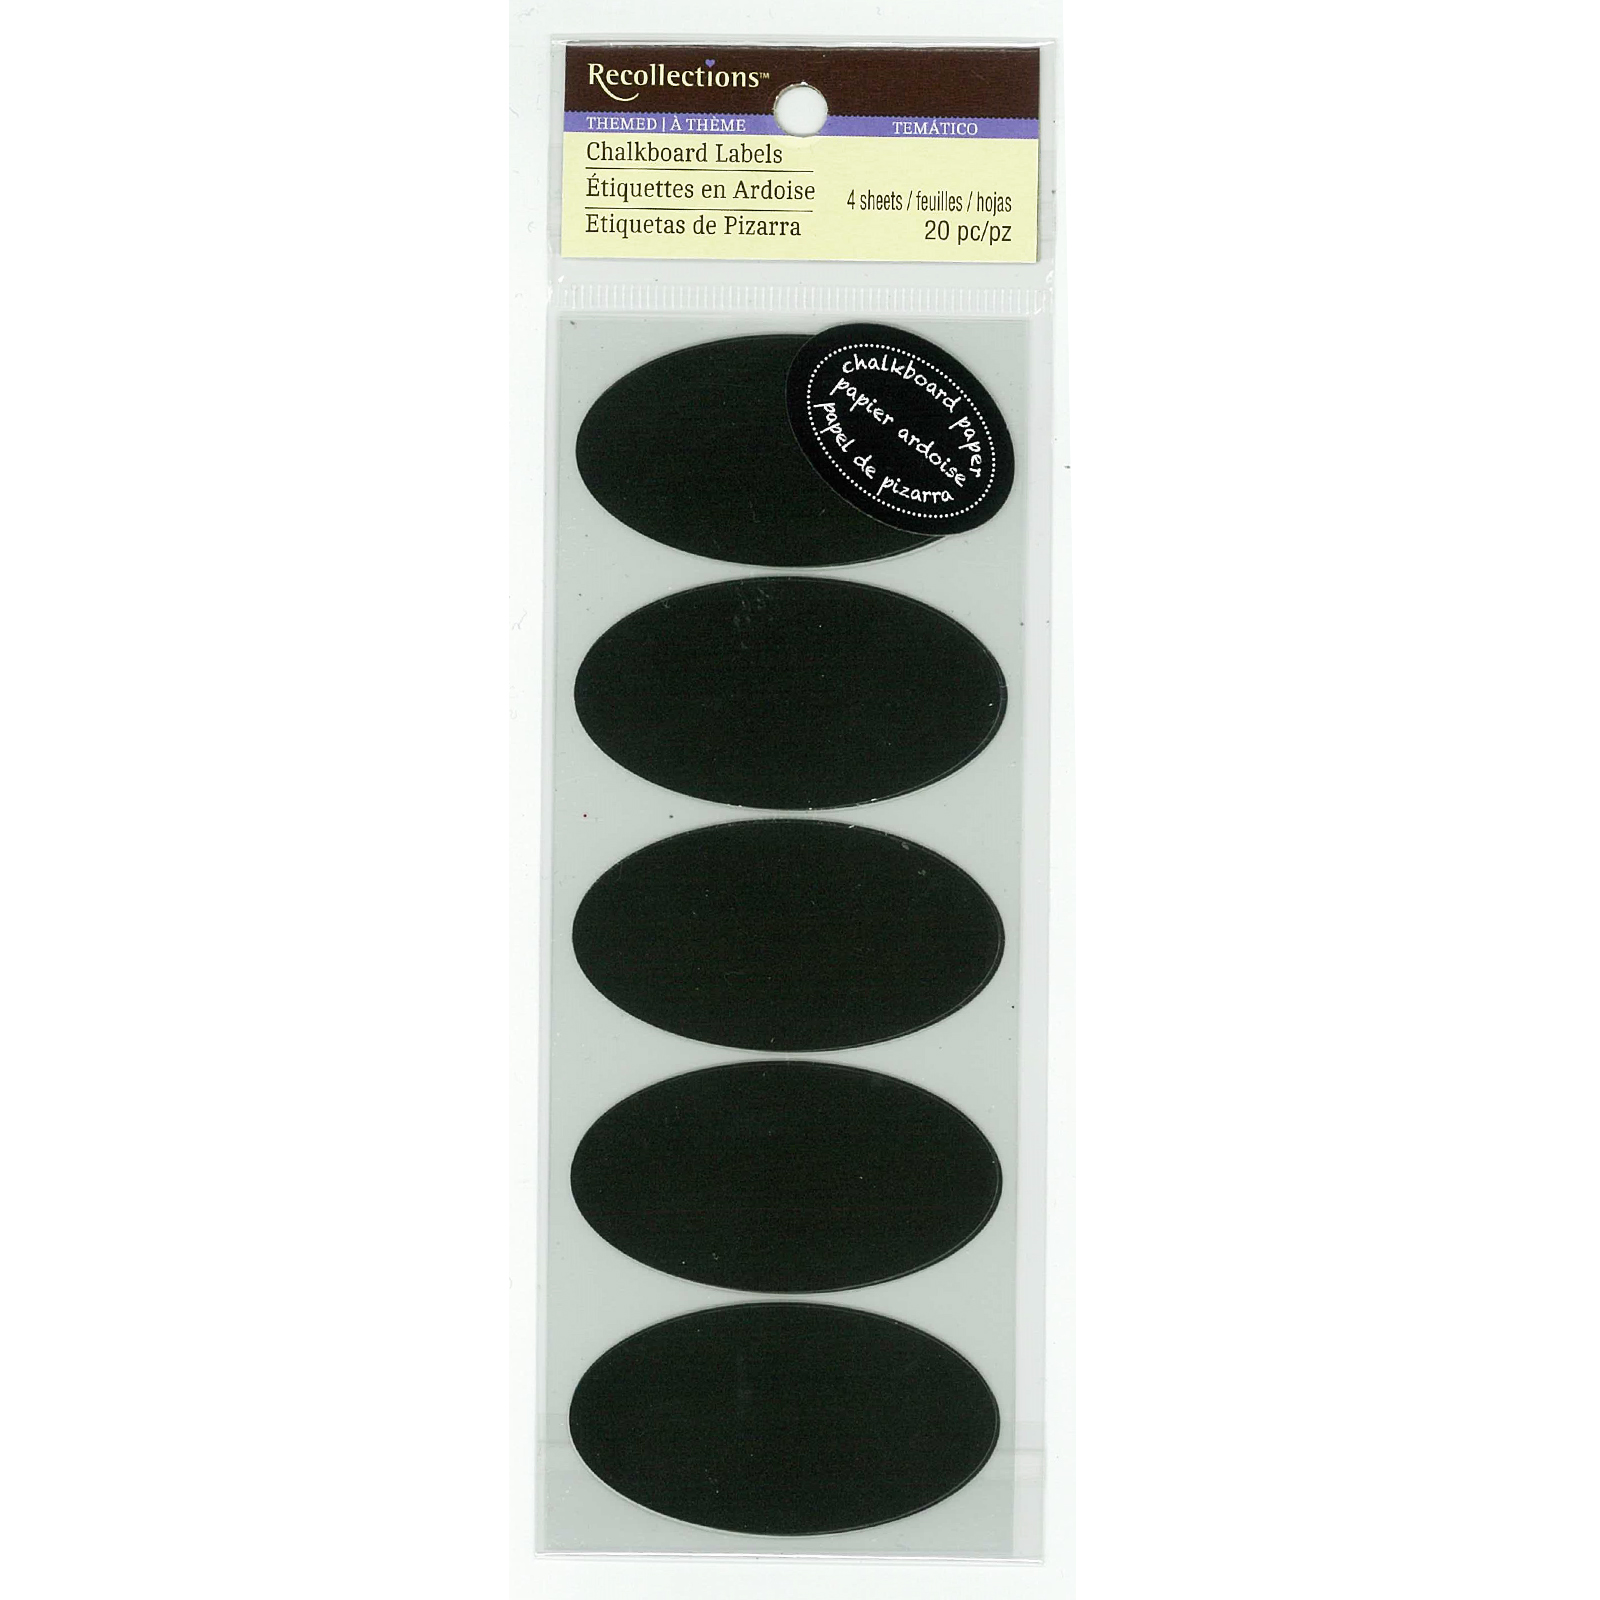 Shop for the Oval Chalkboard Labels by Recollections™ at Michaels